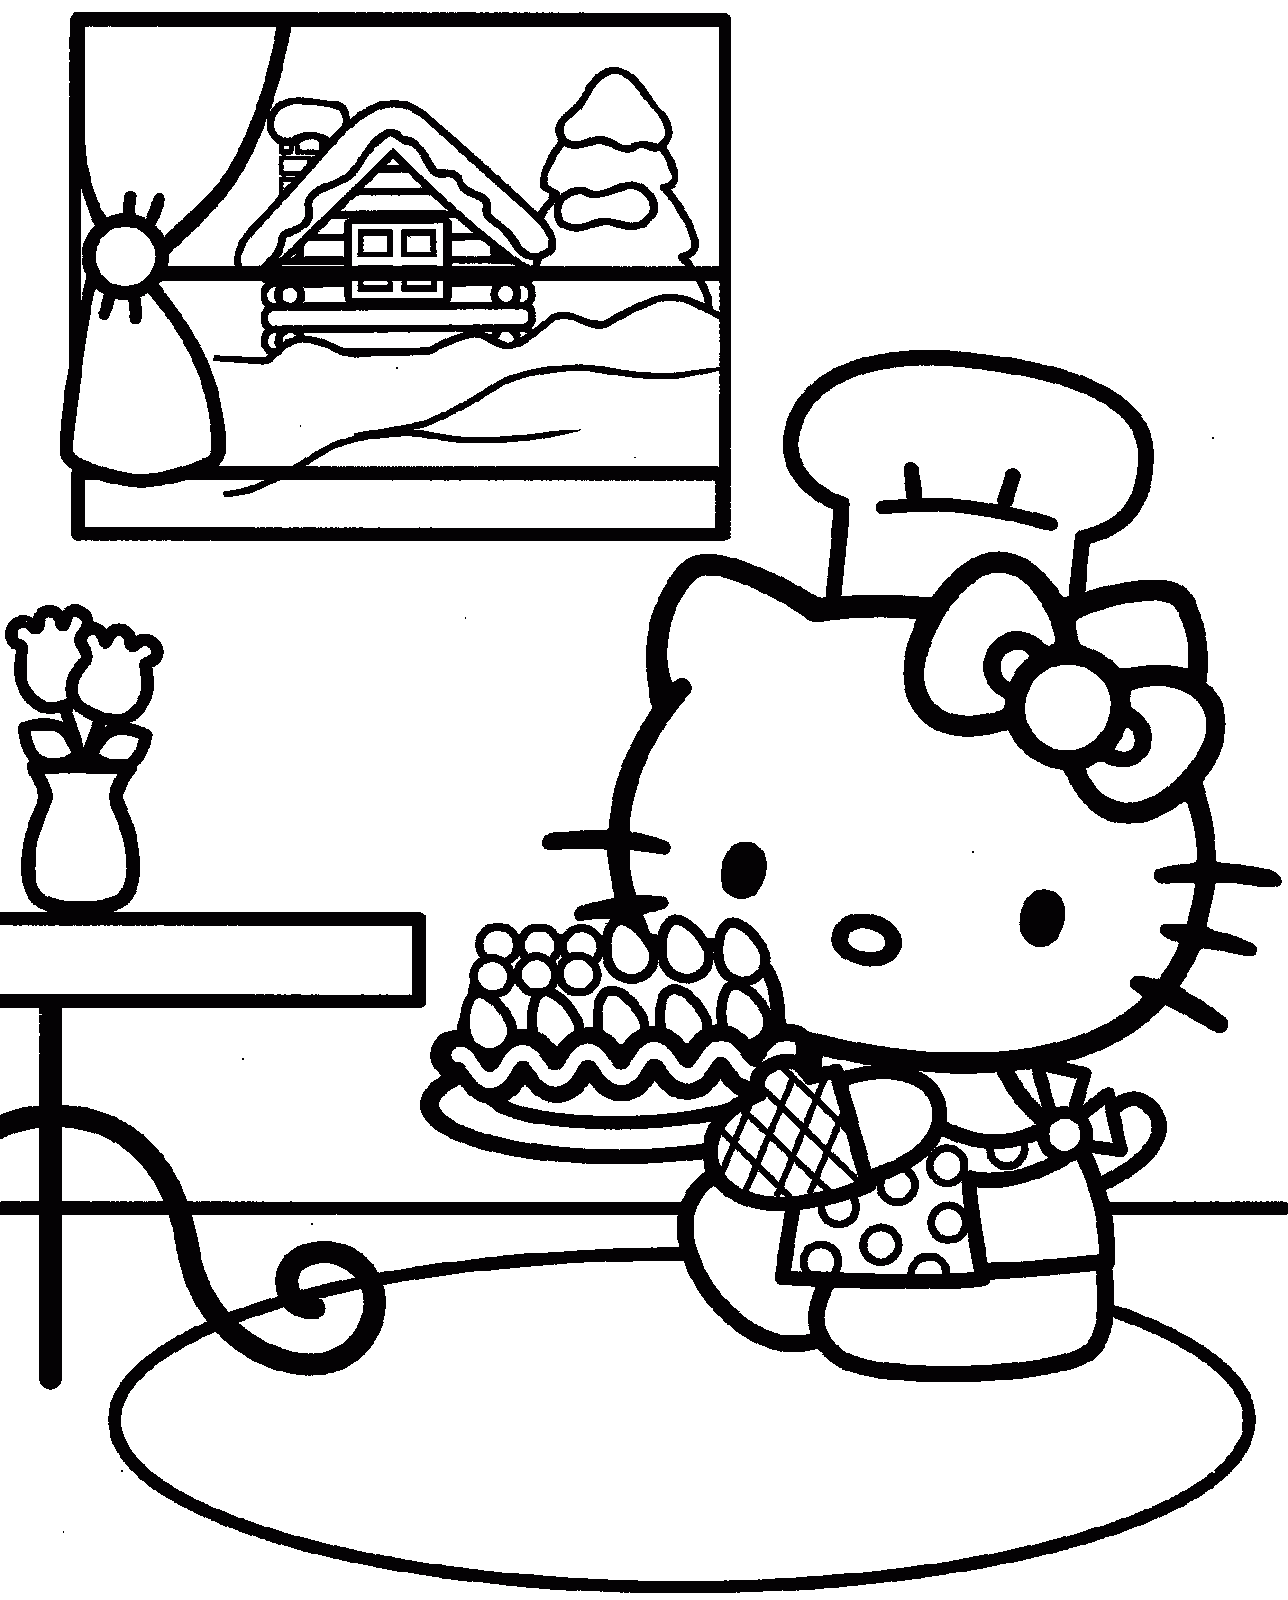 coloring pages to print of hello kitty free printable hello kitty coloring pages for pages kitty print pages of hello to coloring 